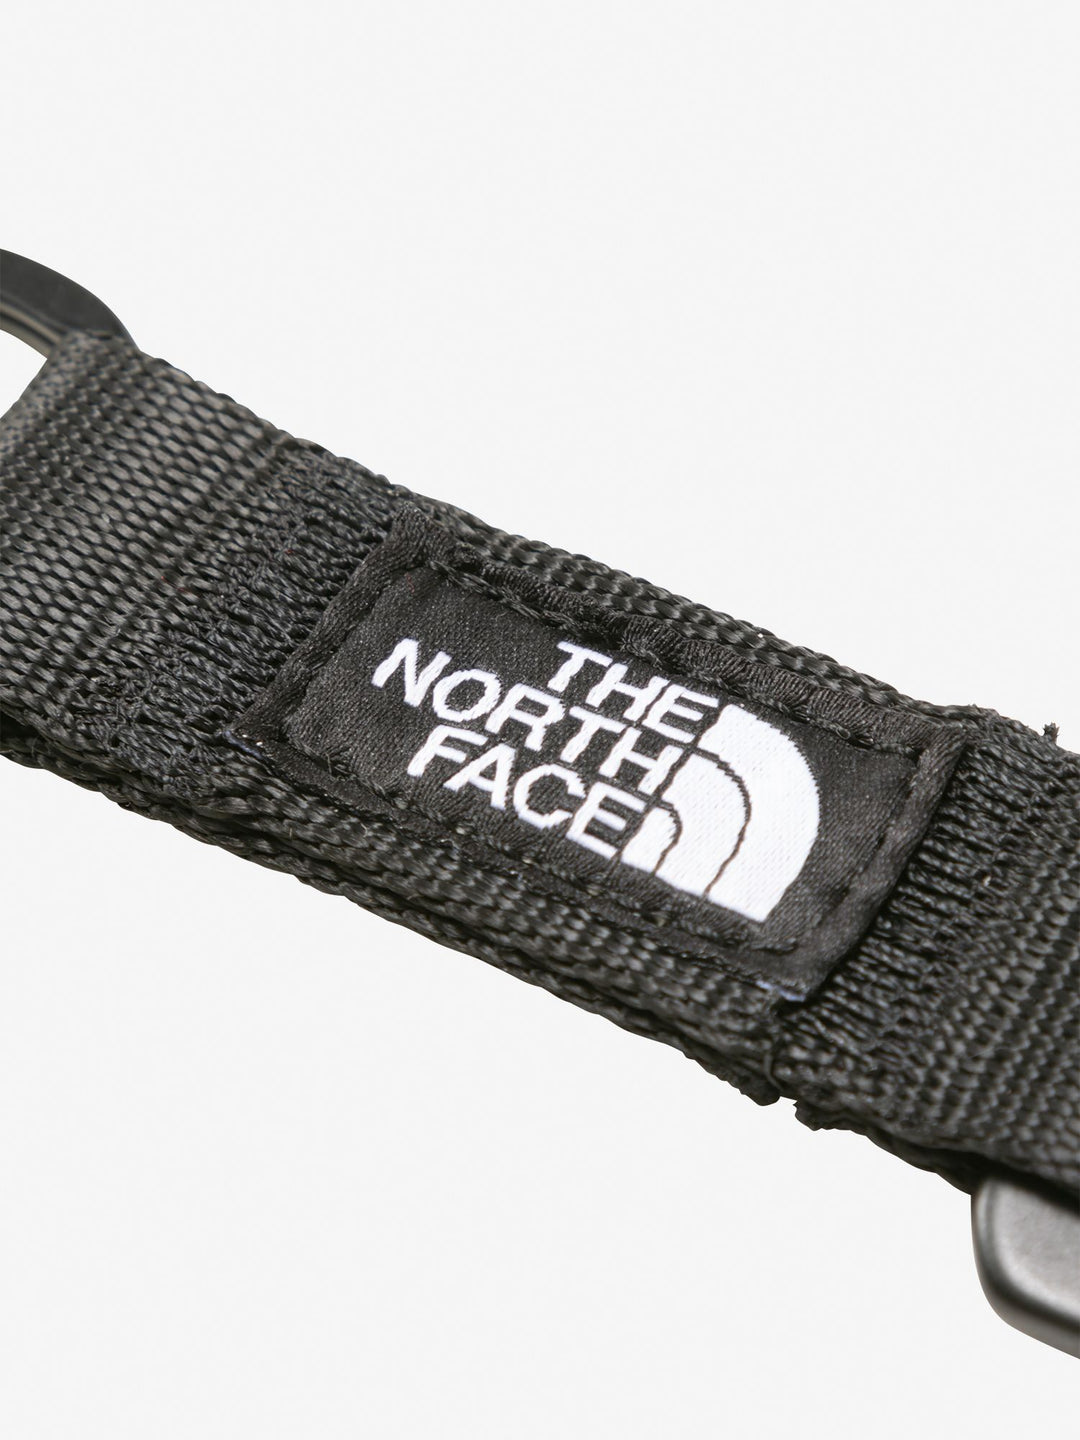 THE NORTH FACE/　TNF KEY KEEPER